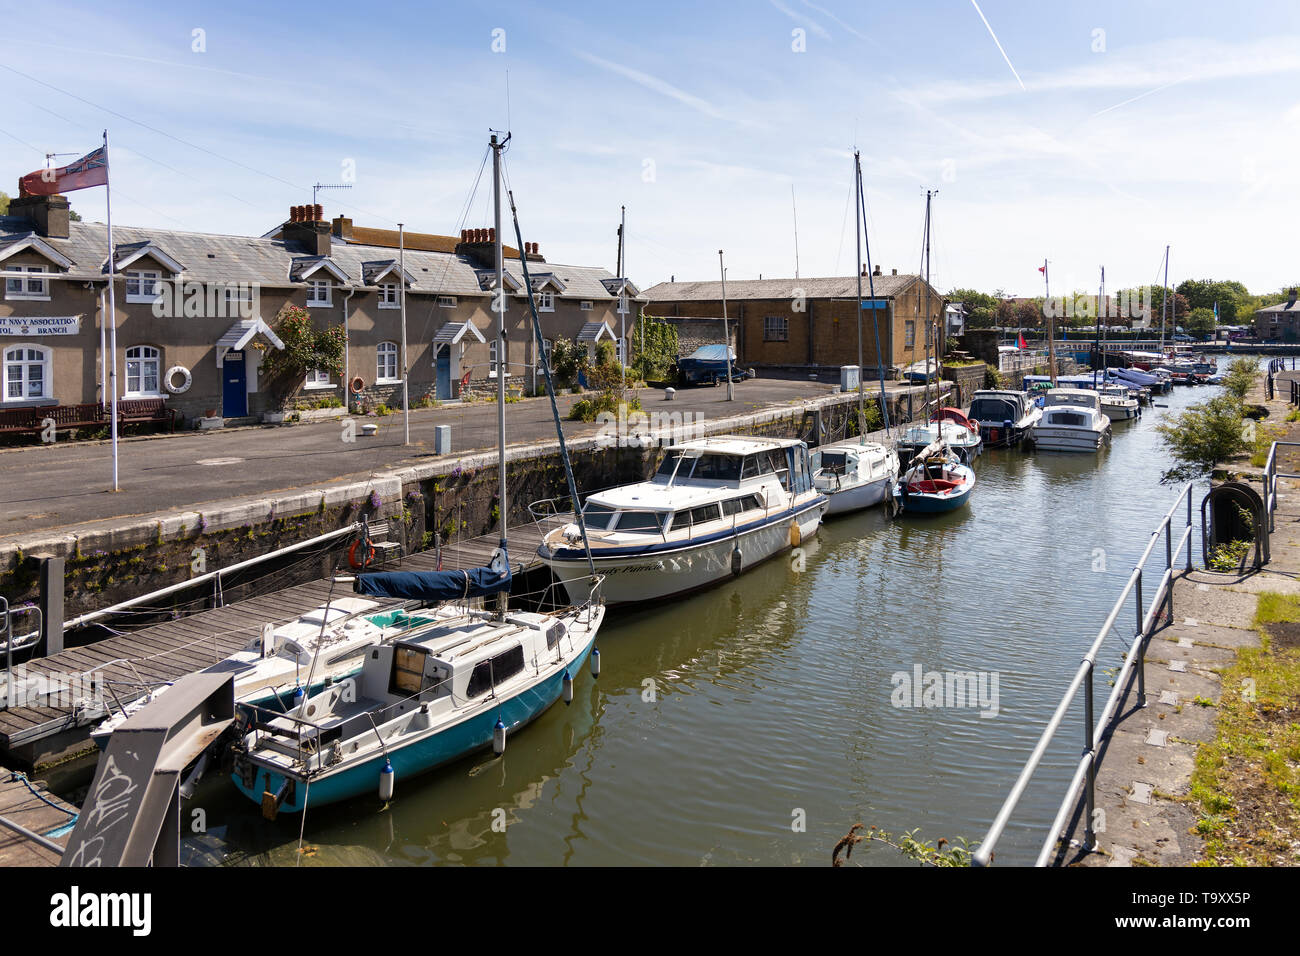 BRISTOL, UK - MAY 14 : View of boats on the River Avon in Bristol on May 14, 2019 Stock Photo